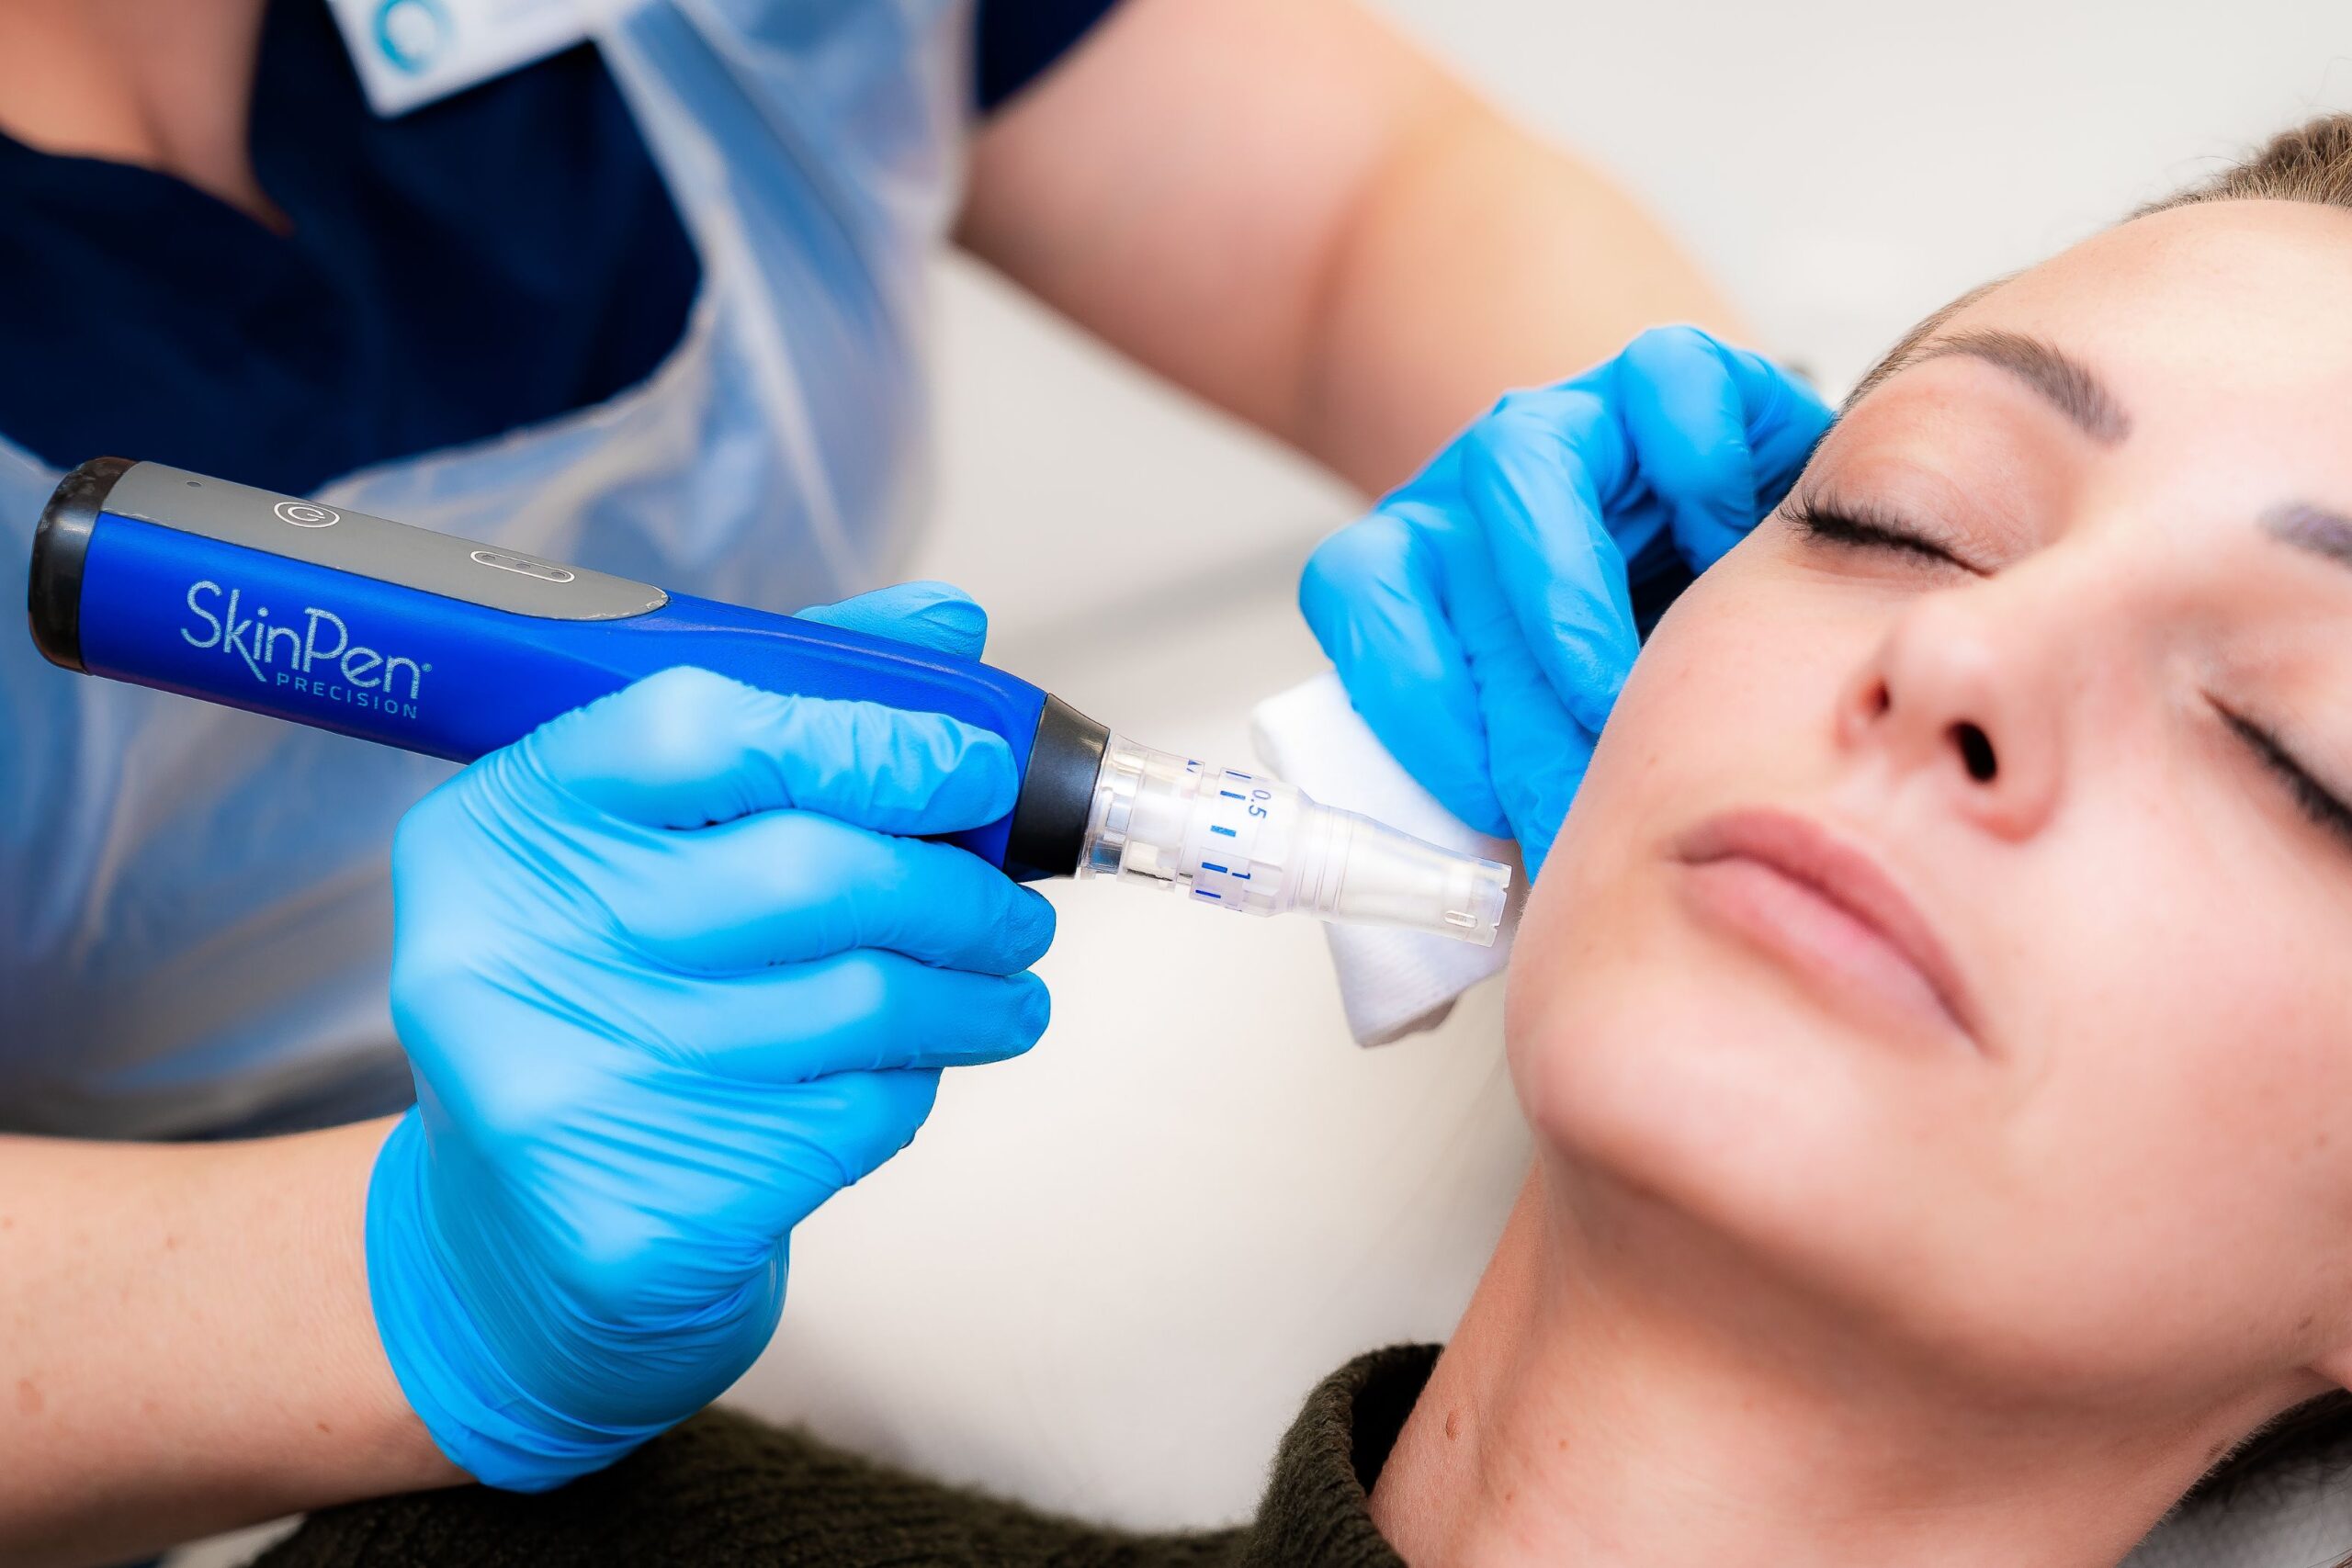 Microneedling for enlarged pores at Freyja Medical in Wrexham, Nantwich and Cheshire